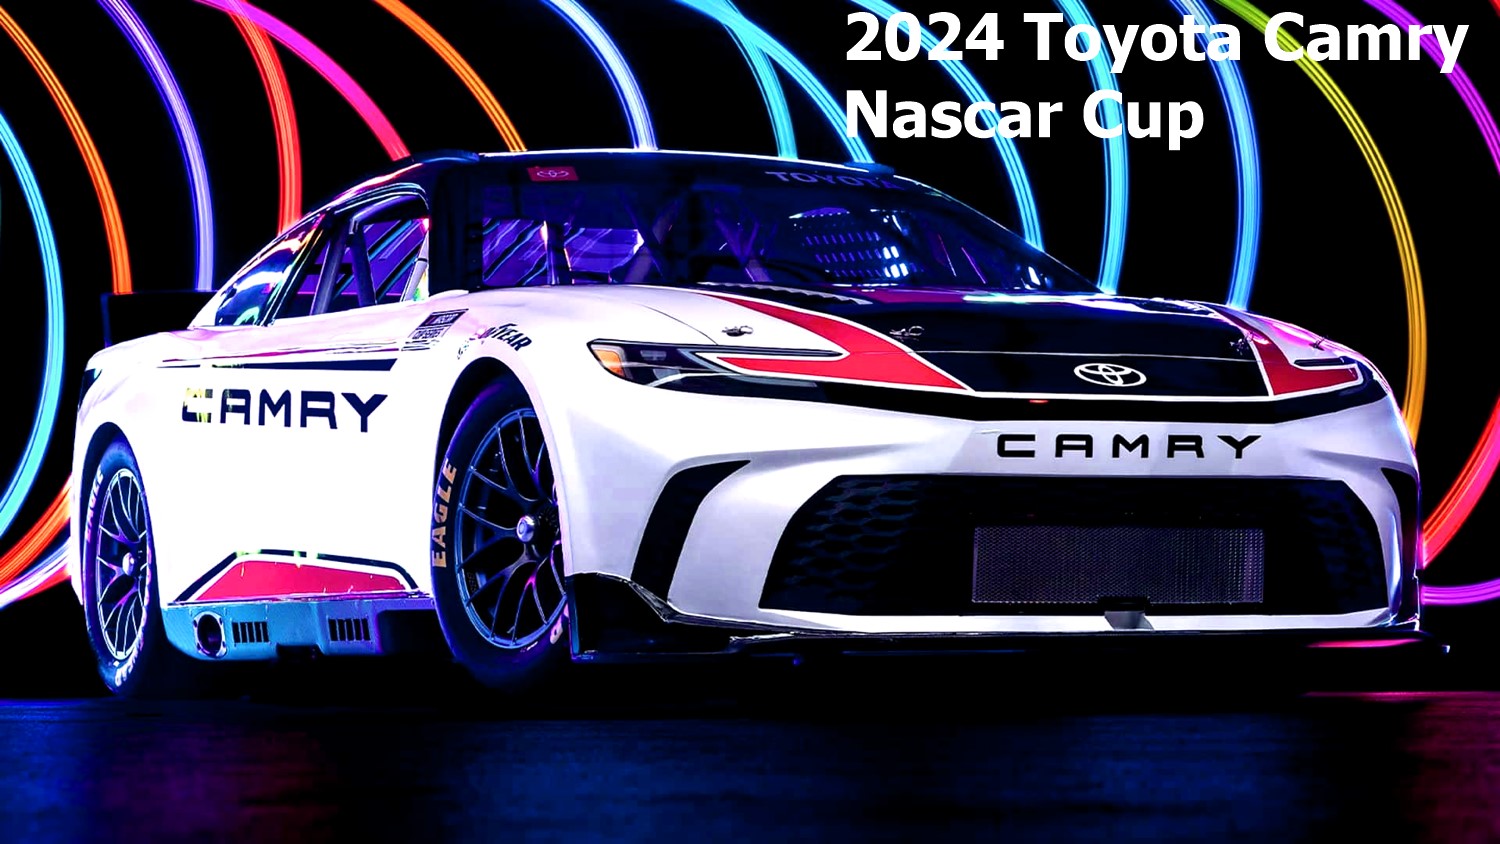 Introducing the New 2024 Toyota Camry NASCAR Cup Car!